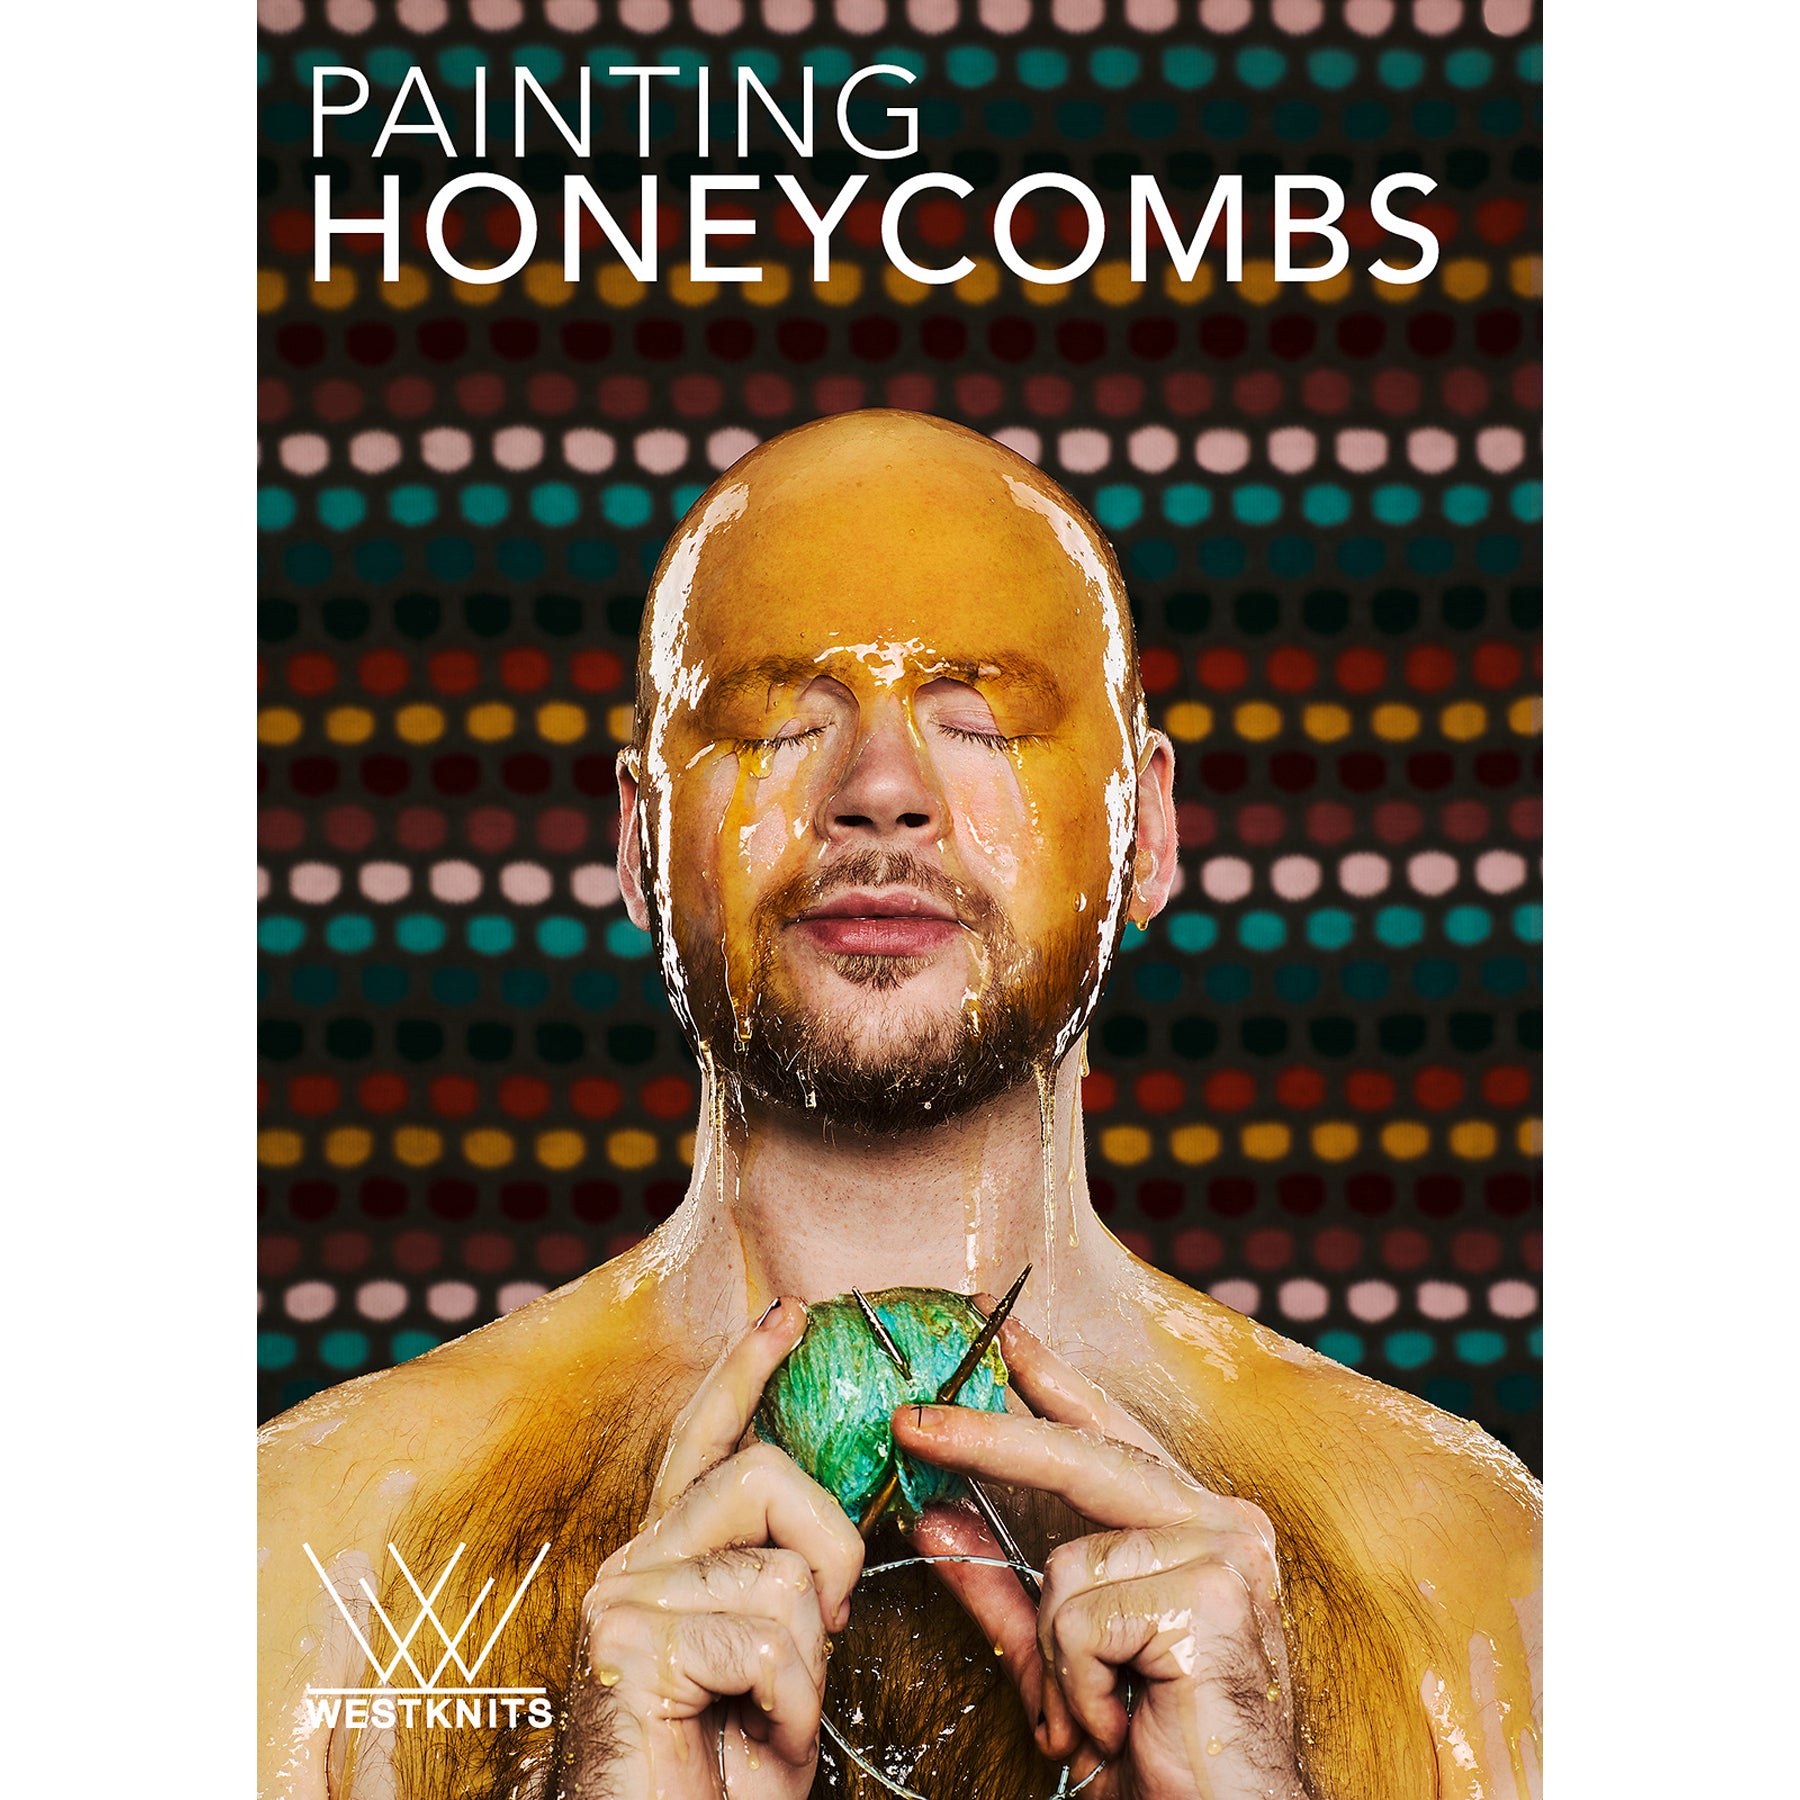 Painting Honeycombs